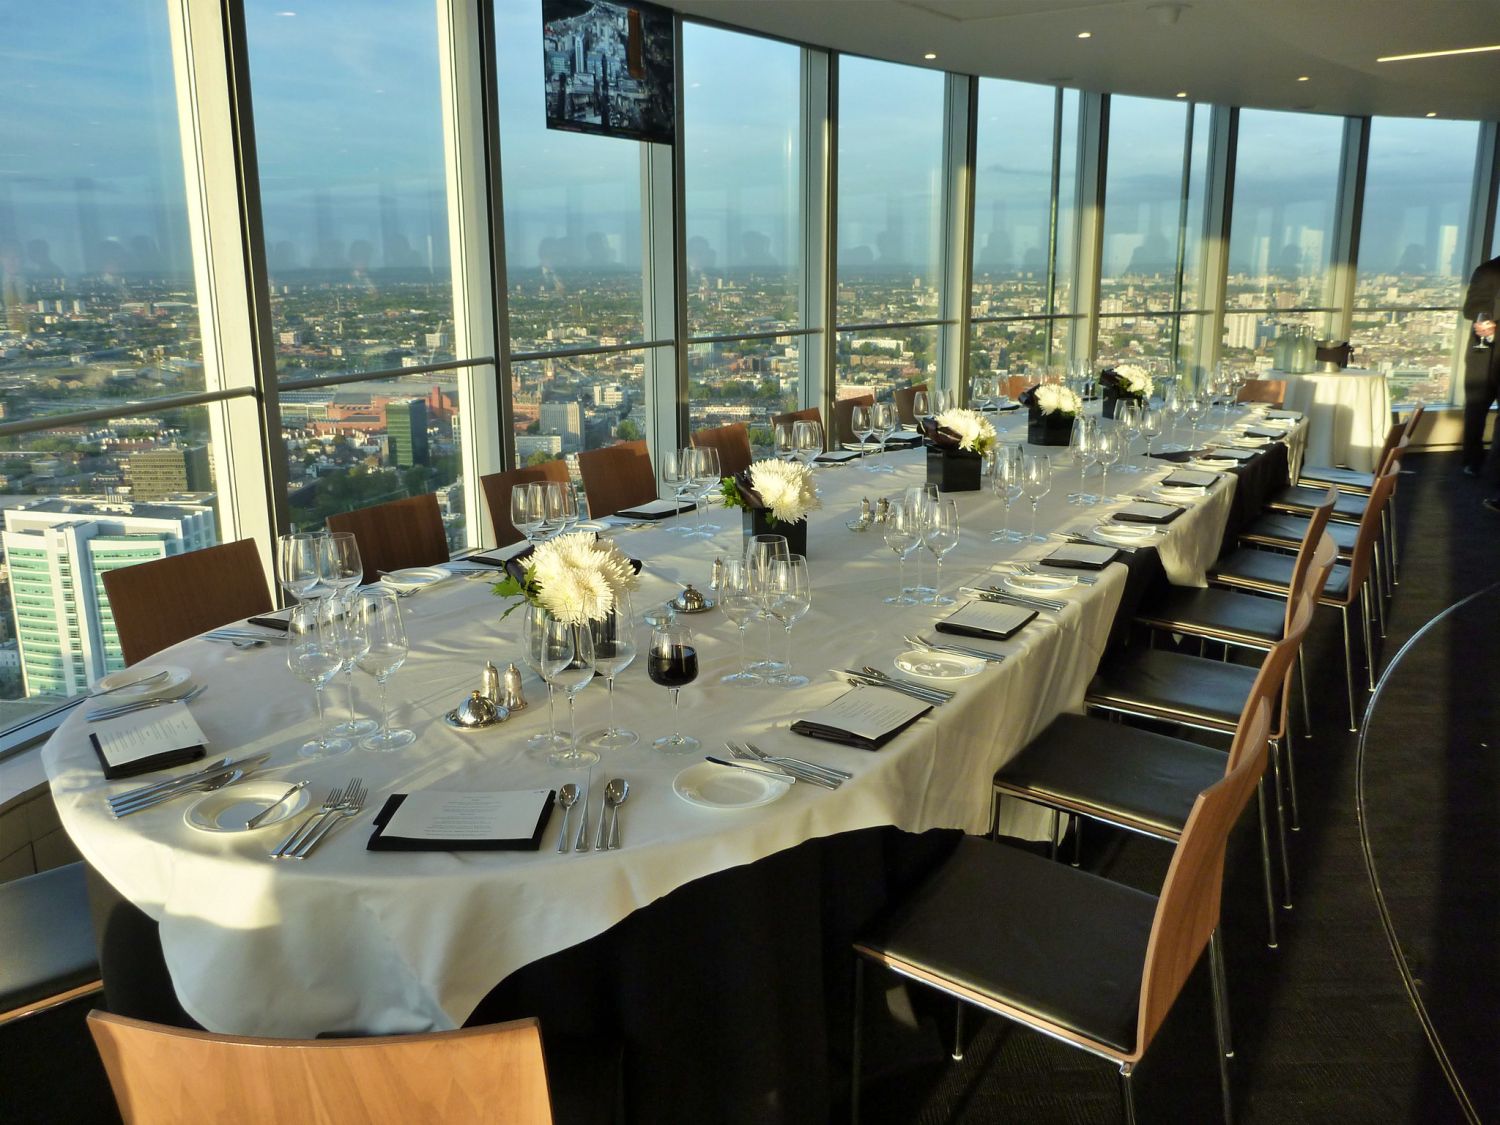 Top of the Tower restaurant